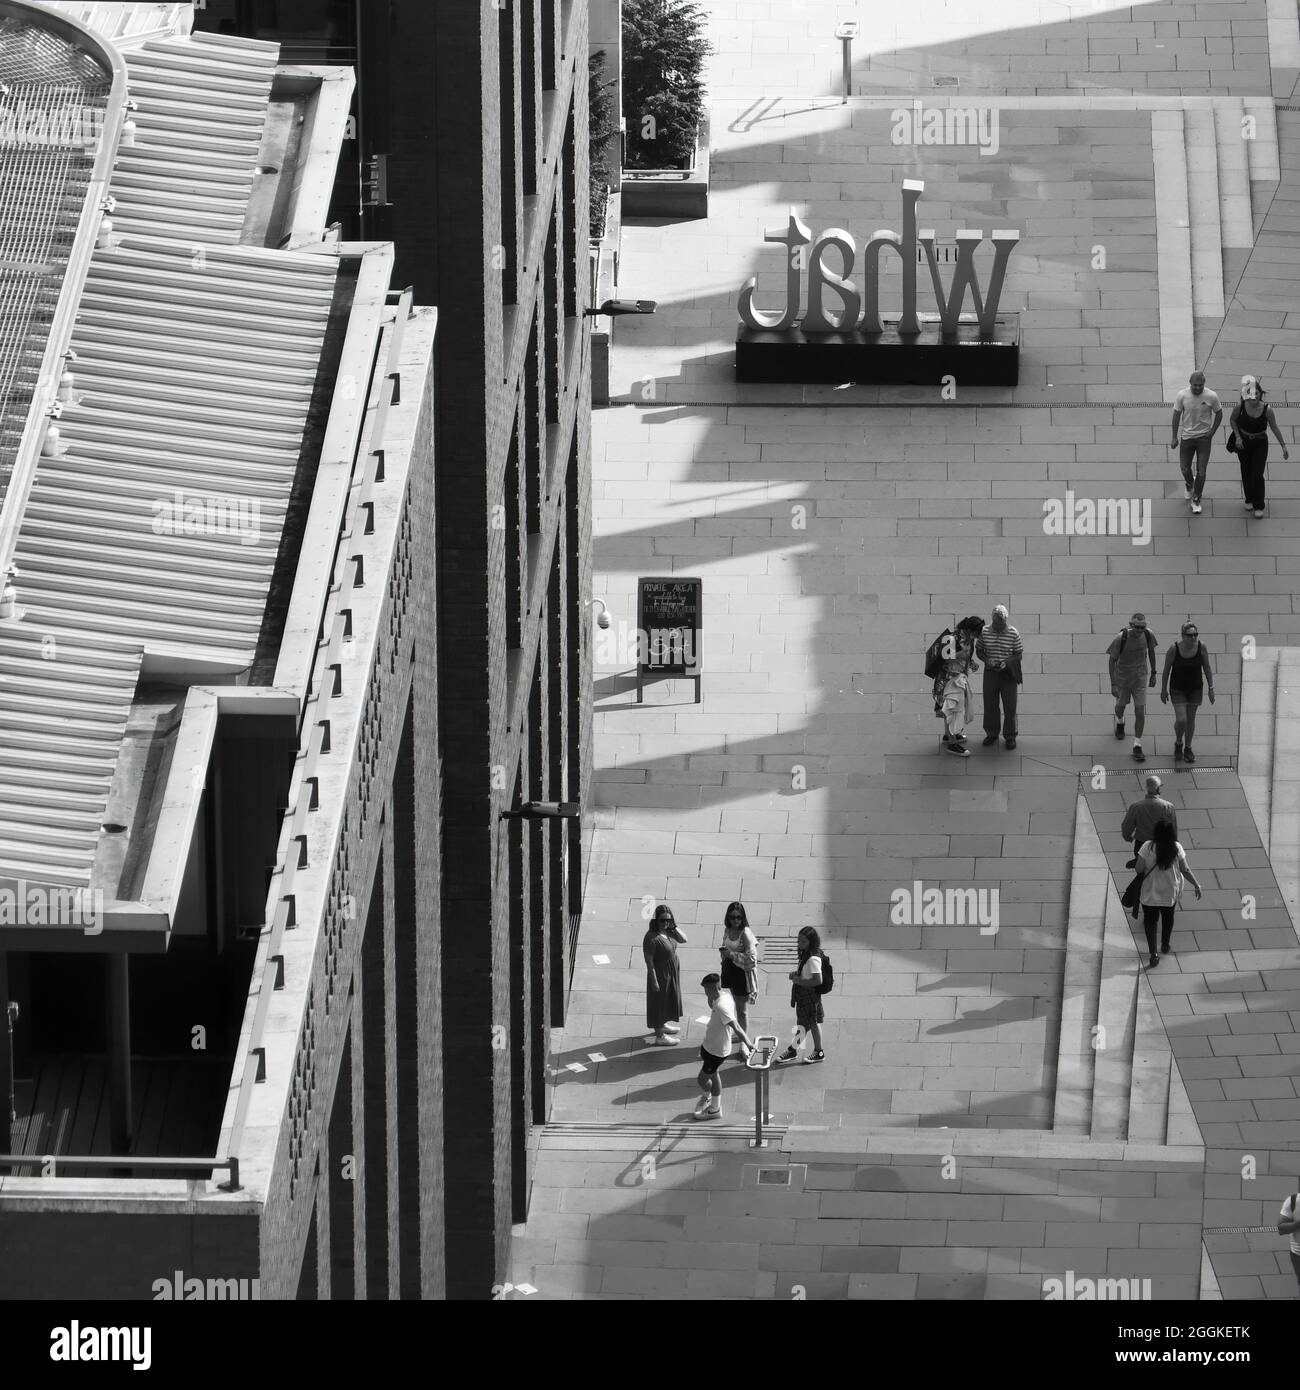 London, Greater London, England, August 24 2021: Aerial black and white image of groups of people walking and socialising on a walkway near St Pauls C Stock Photo